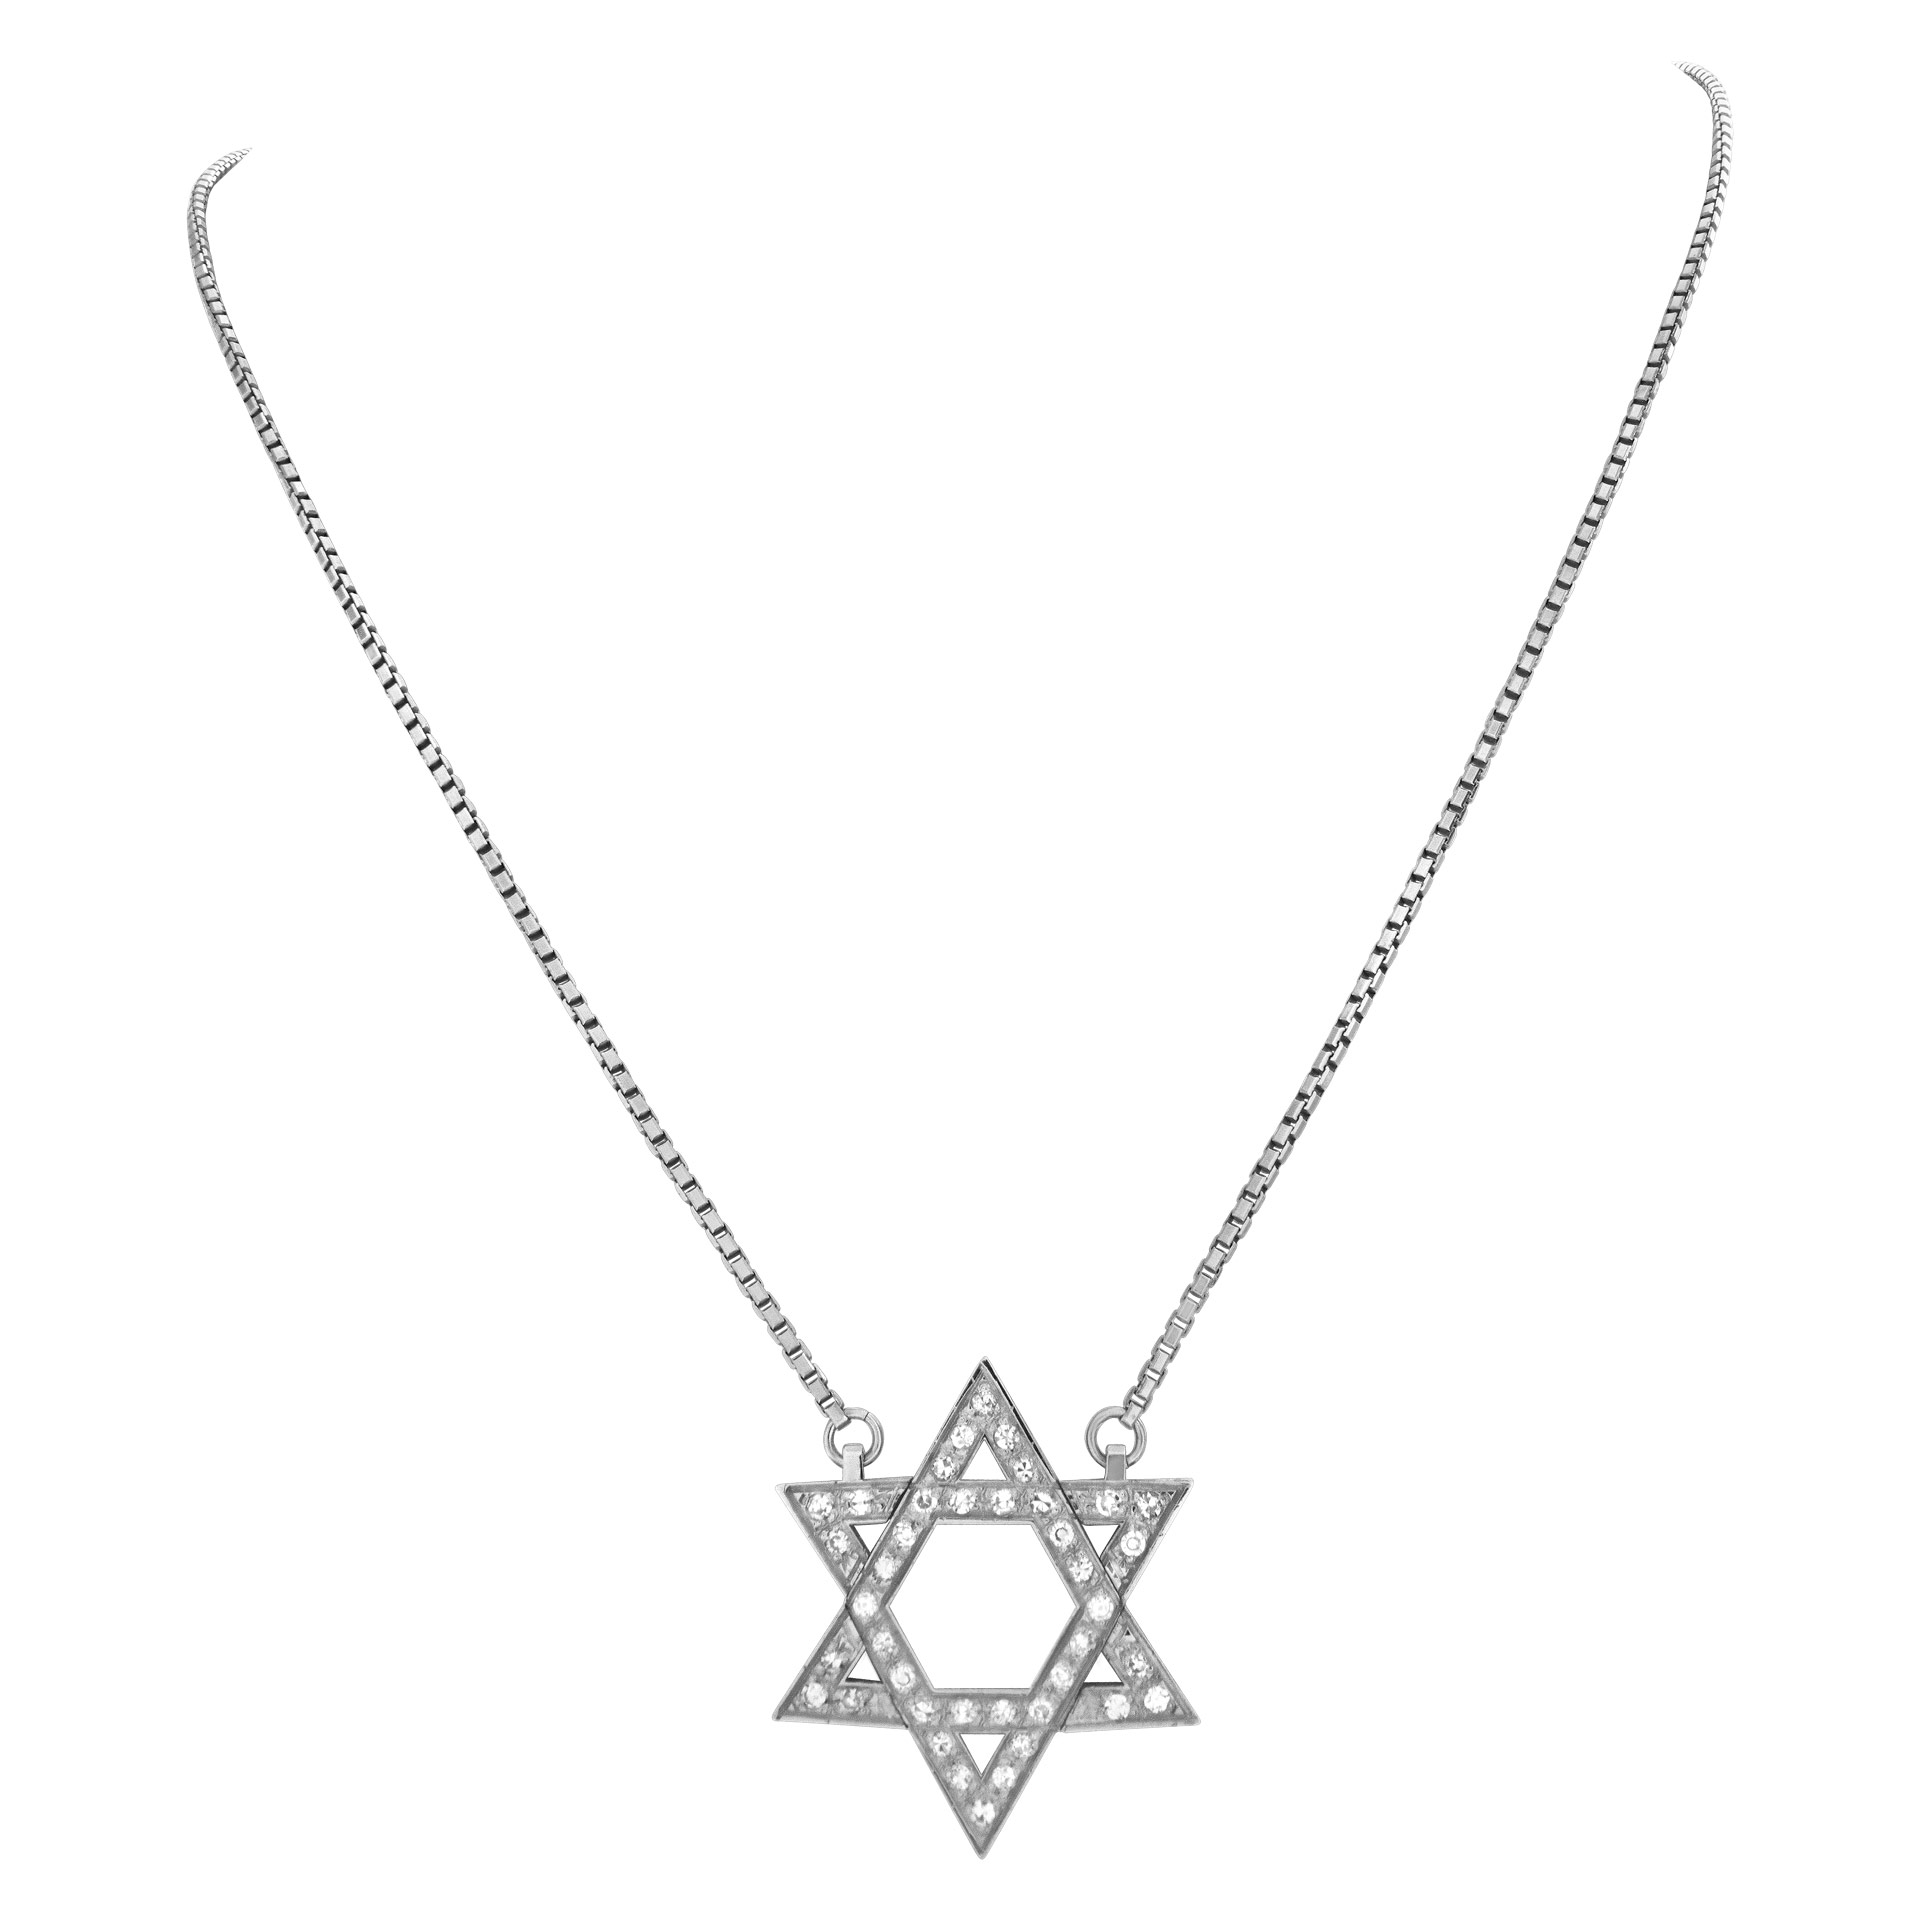 "Star of David" pendant with approximately 0.75 carat pave diamonds set in 18k white gold image 1